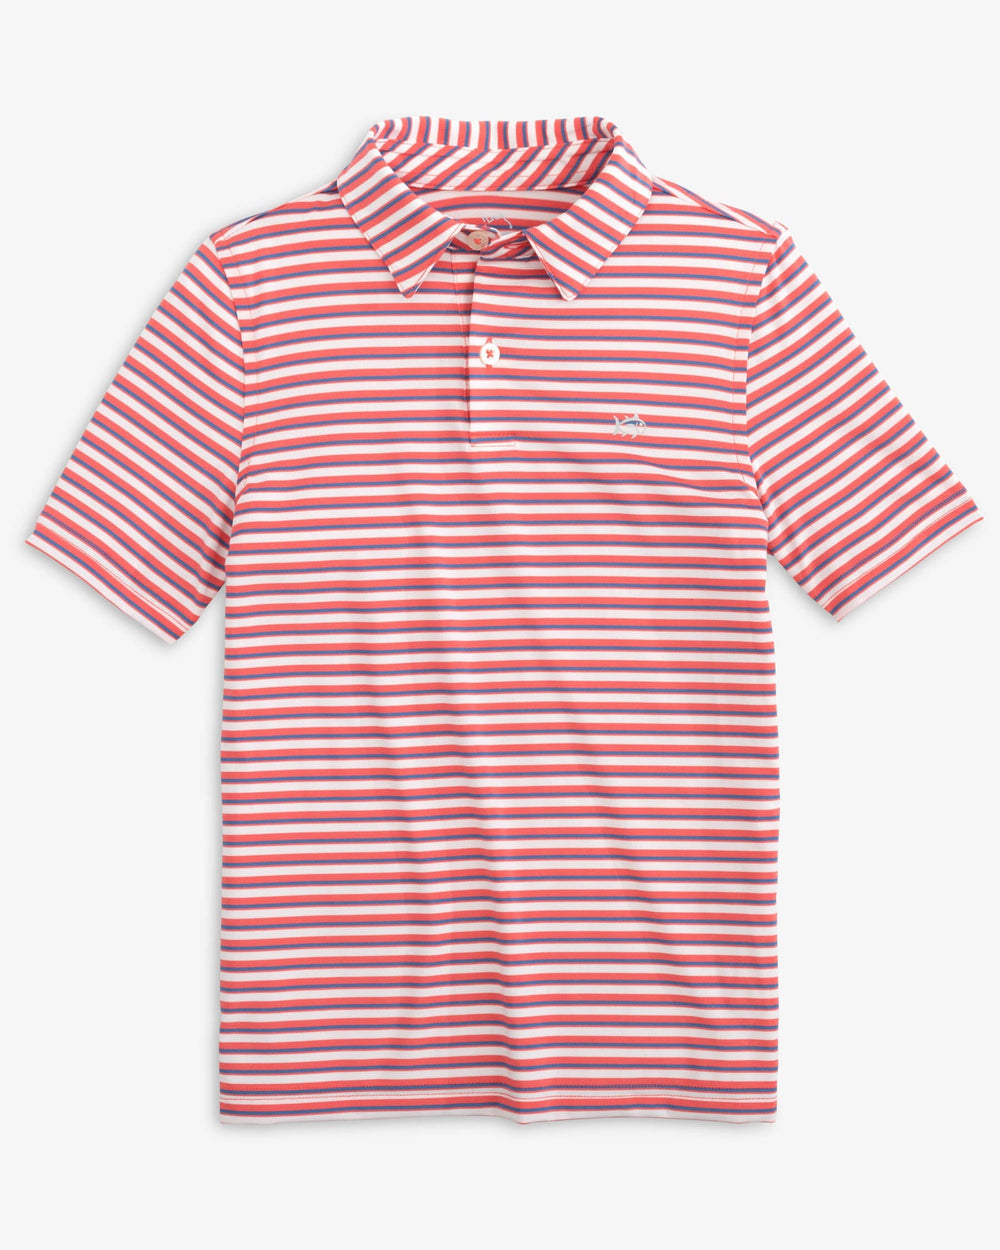 The front view of the Southern Tide Boy's Driver Gulf Stripe Performance Polo Shirt by Southern Tide - Rosewood Red